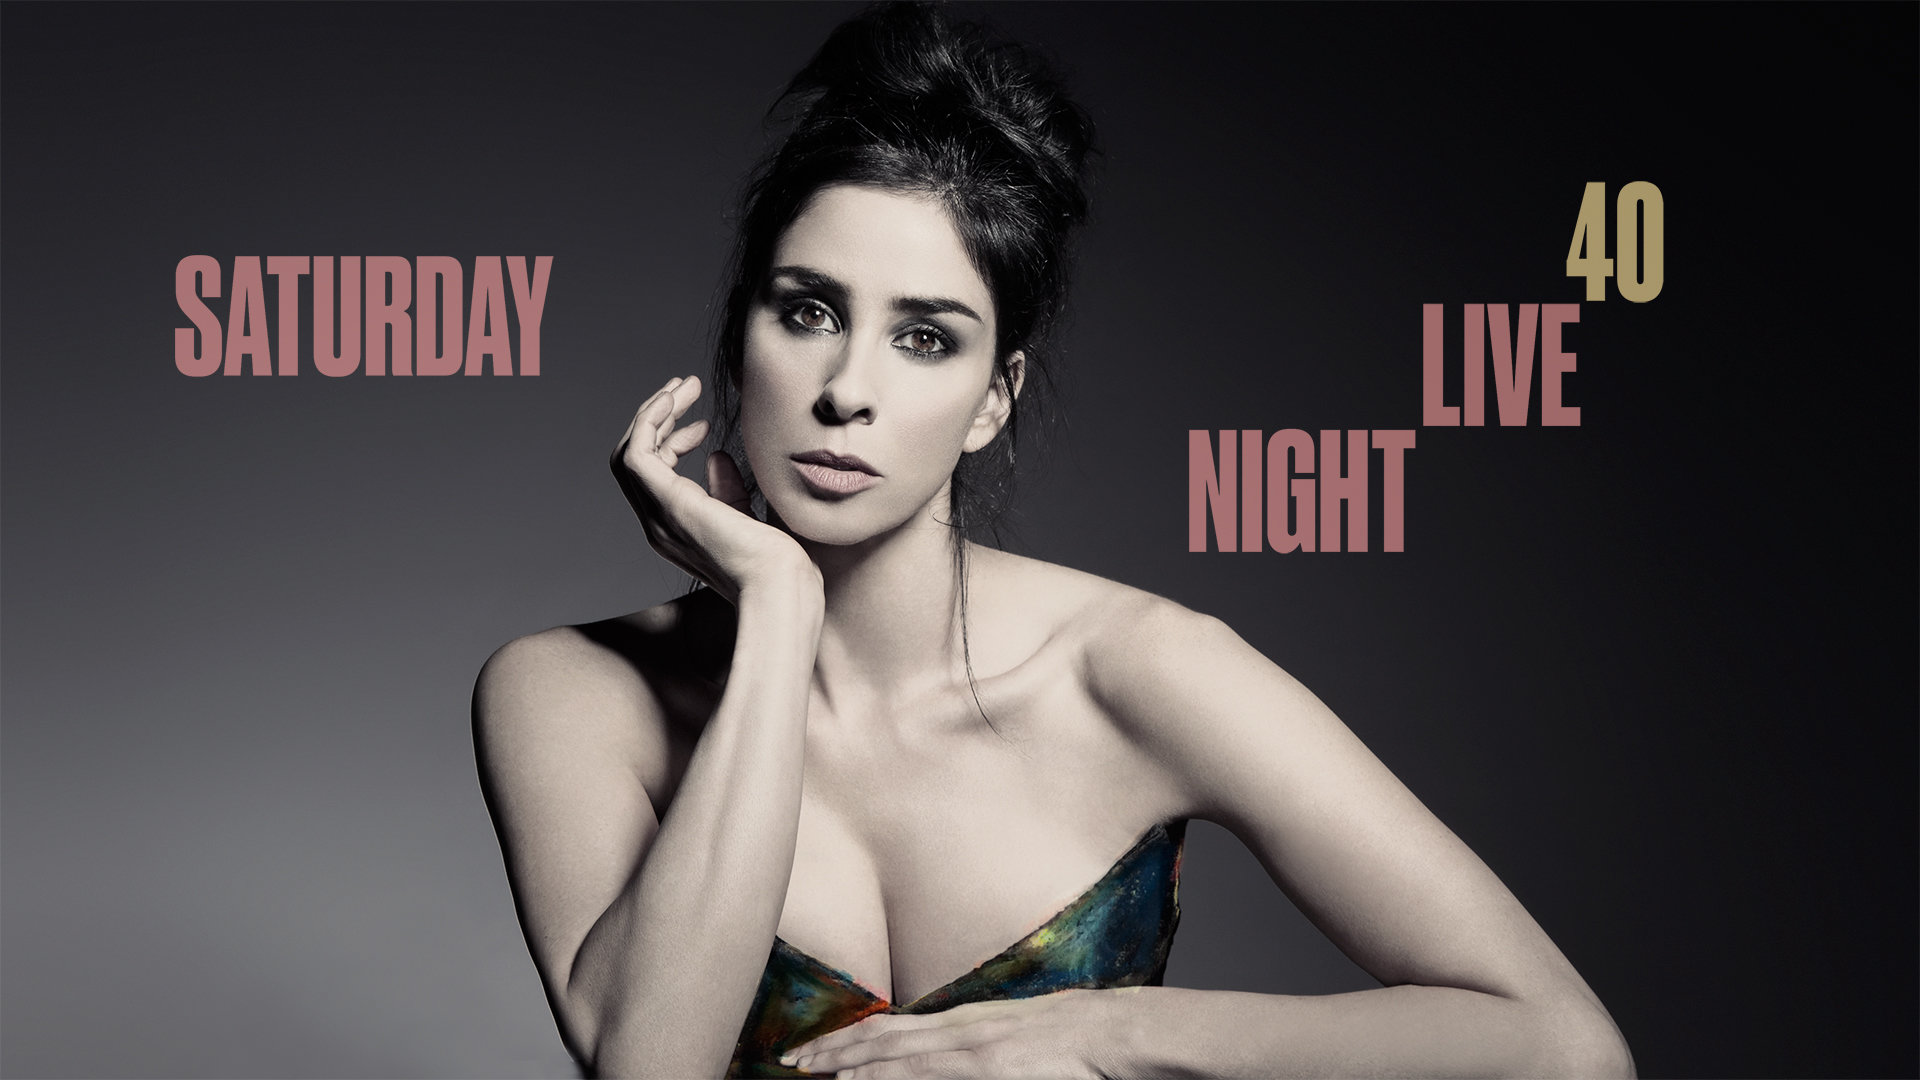 Awesome Saturday Night Live free wallpaper ID:138180 for full hd 1920x1080 desktop